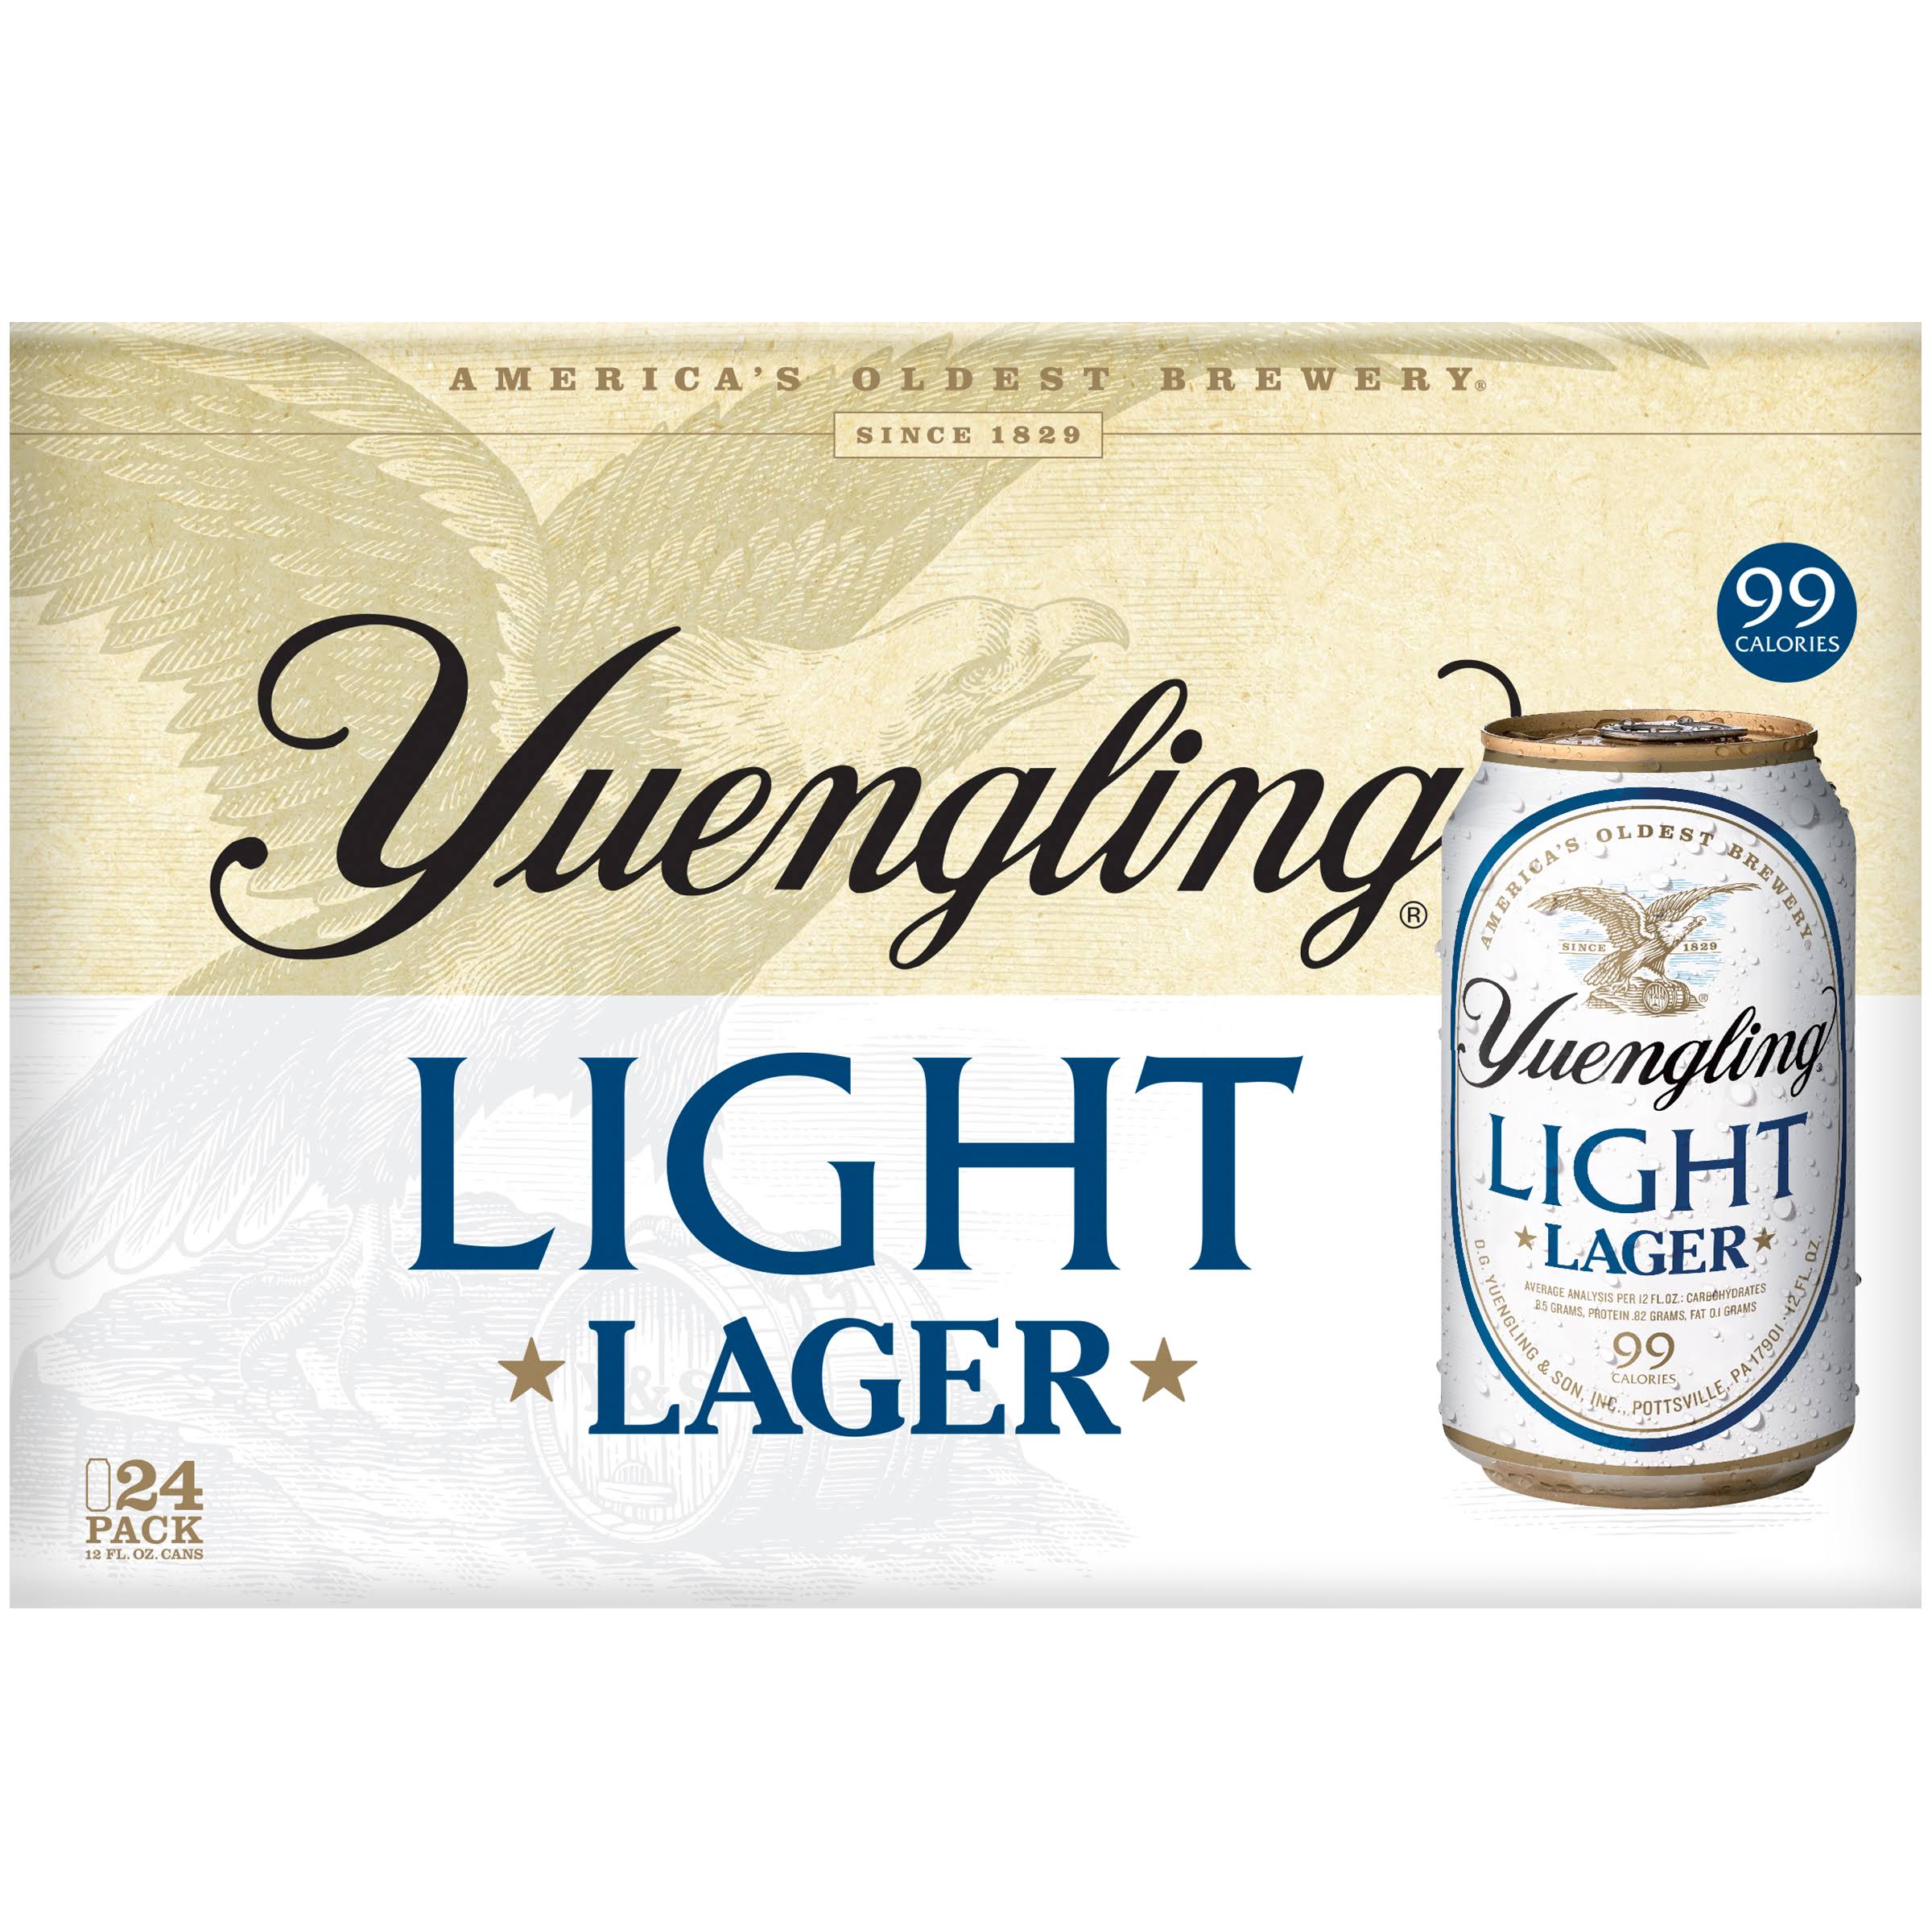 Yuengling Light Lager Cans - 24 Cans